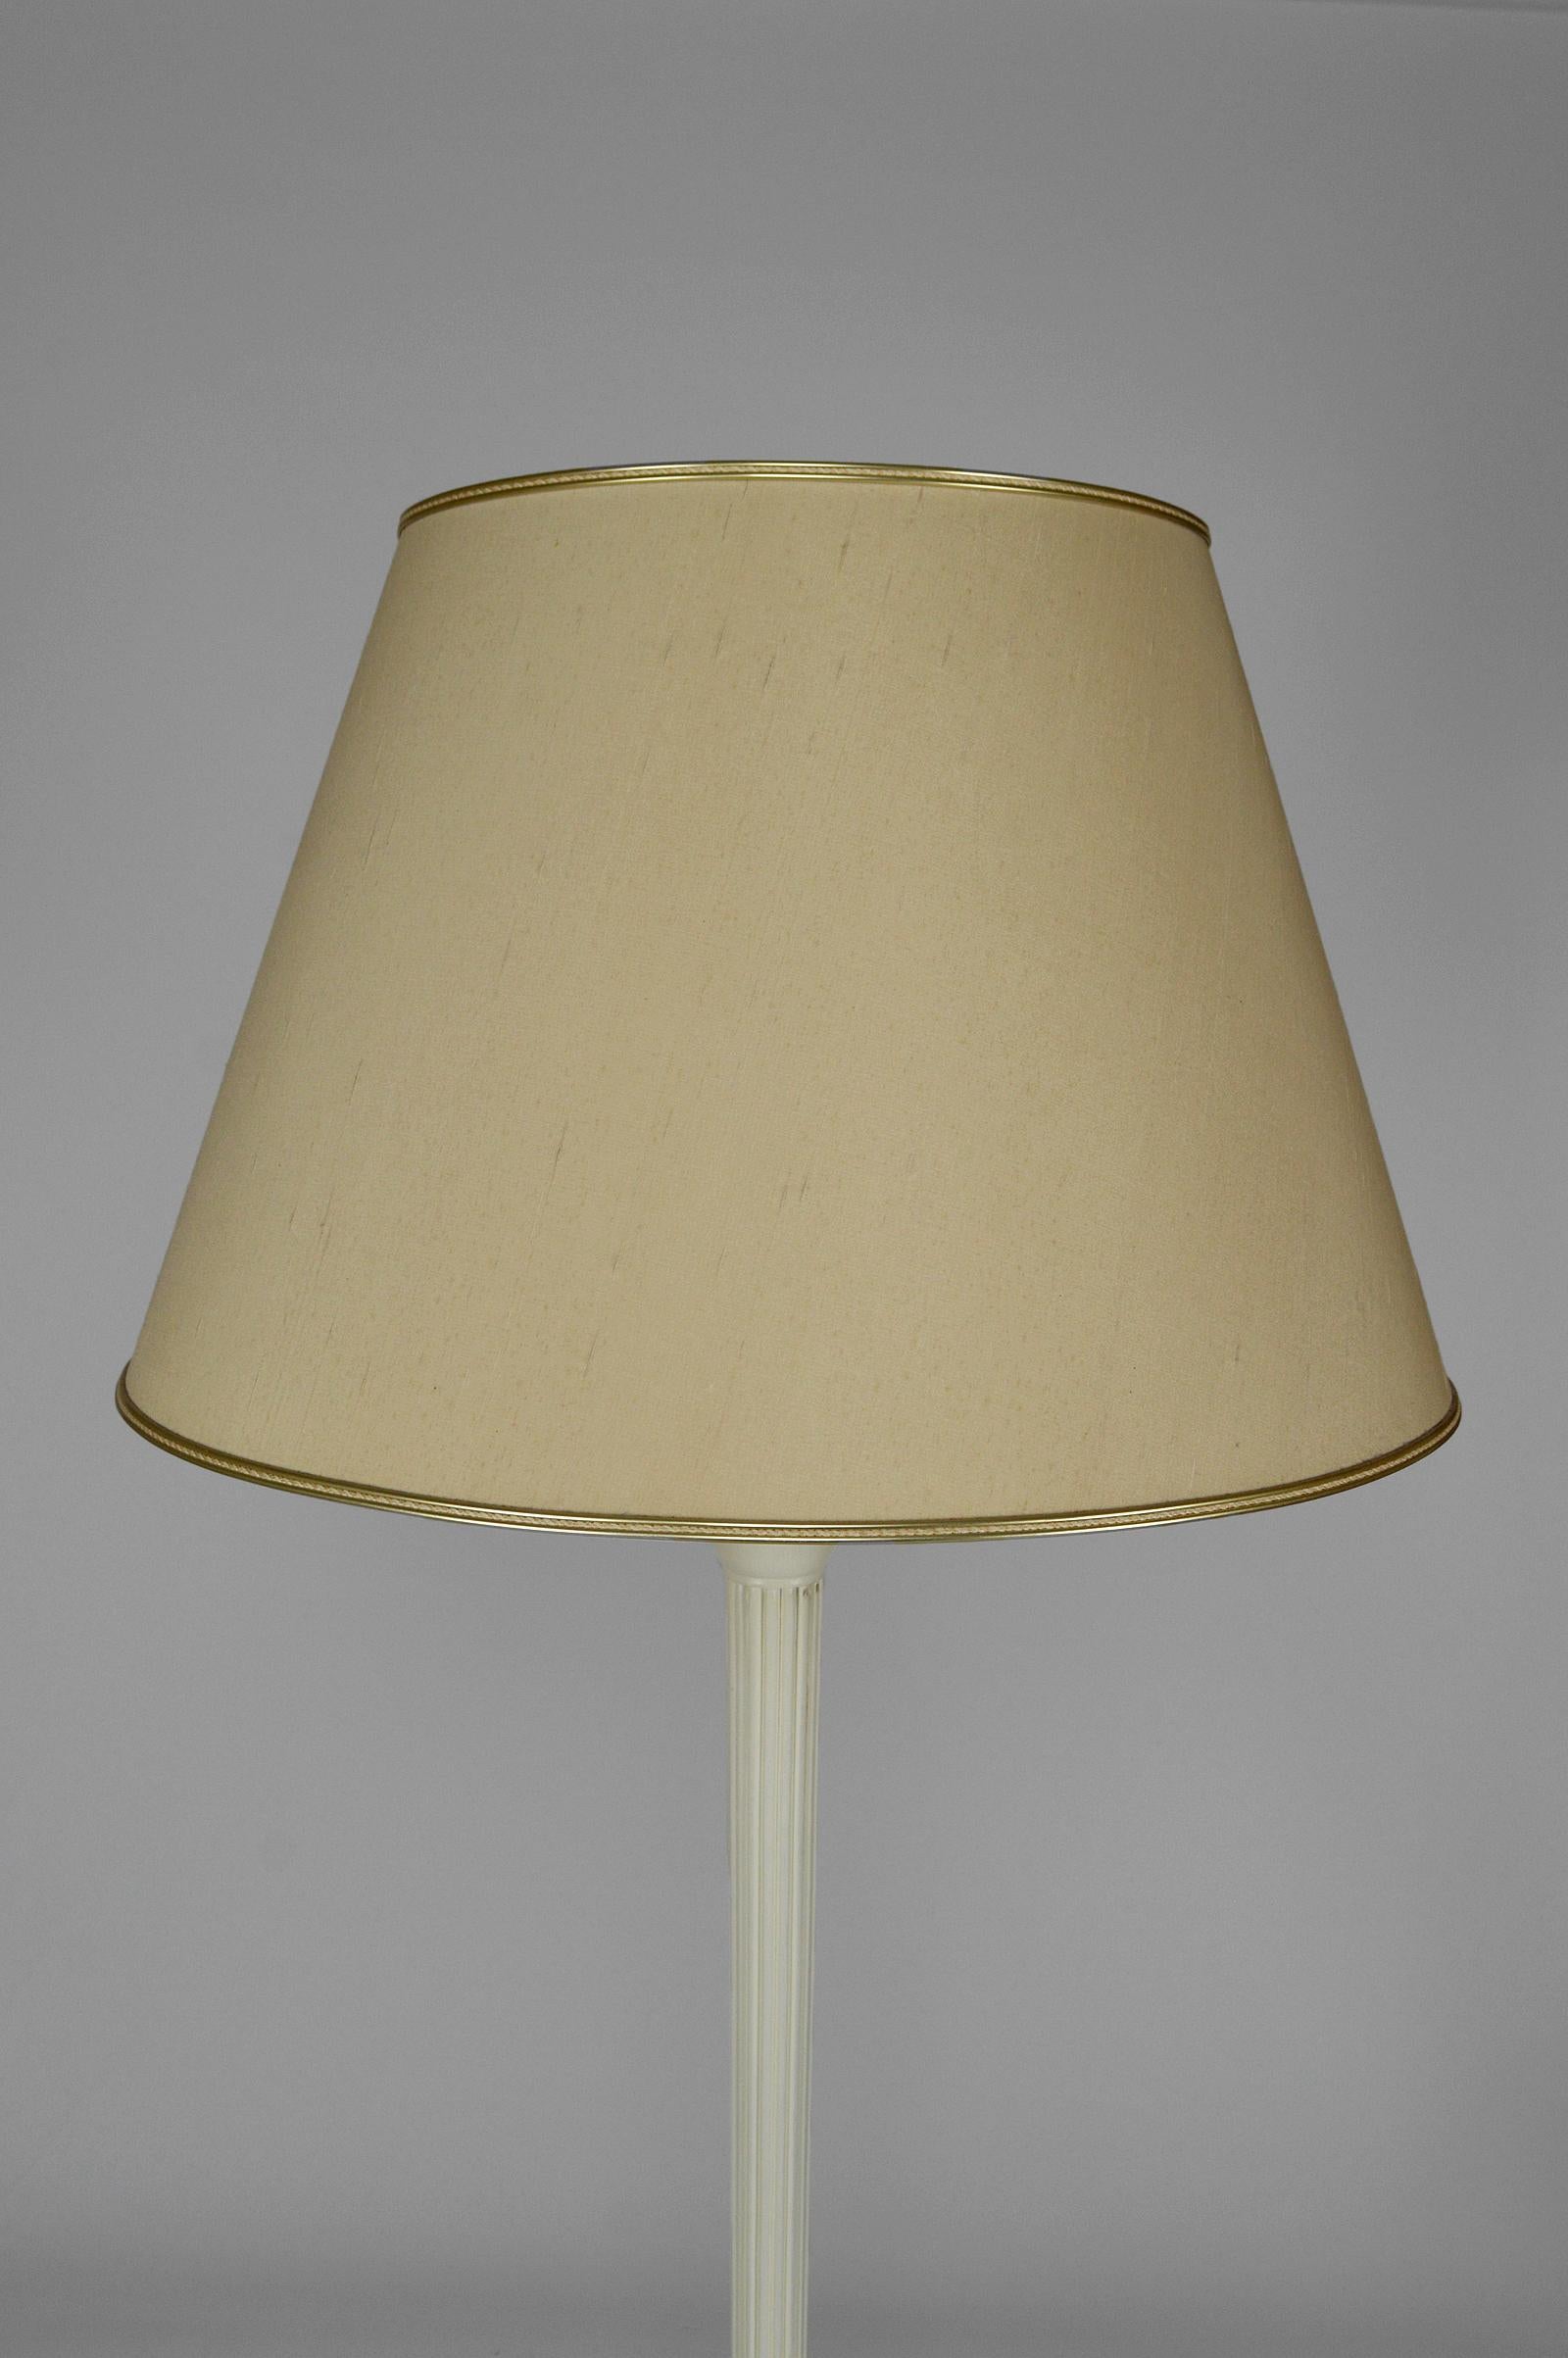 Art Deco Floor Lamp in Painted Wood, France, circa 1925 For Sale 2